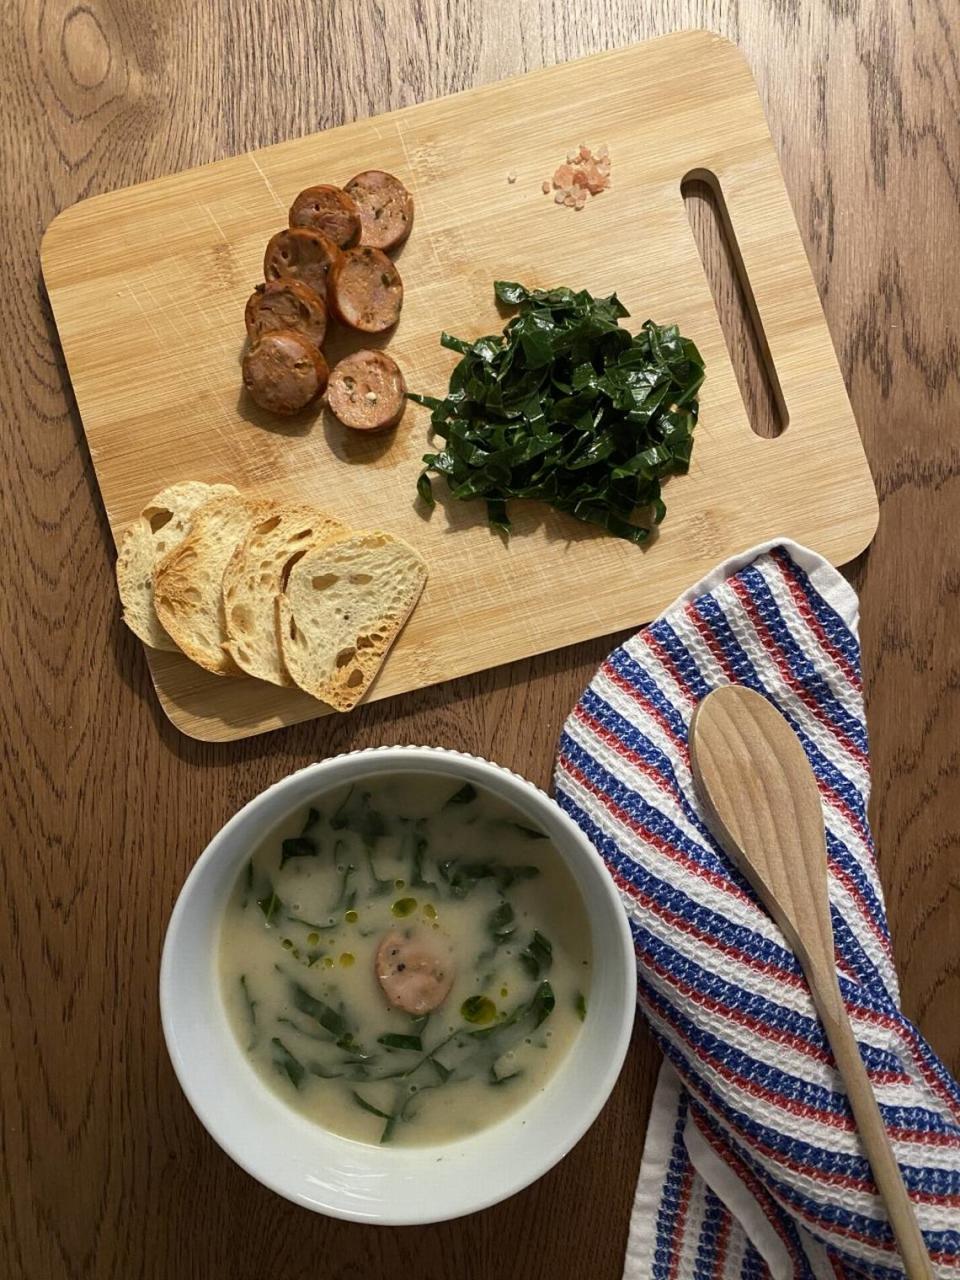 Portuguese cuisine-inspired “caldo verde” is one of the home-cooked soup options offered on the weekly What Soup menu. 